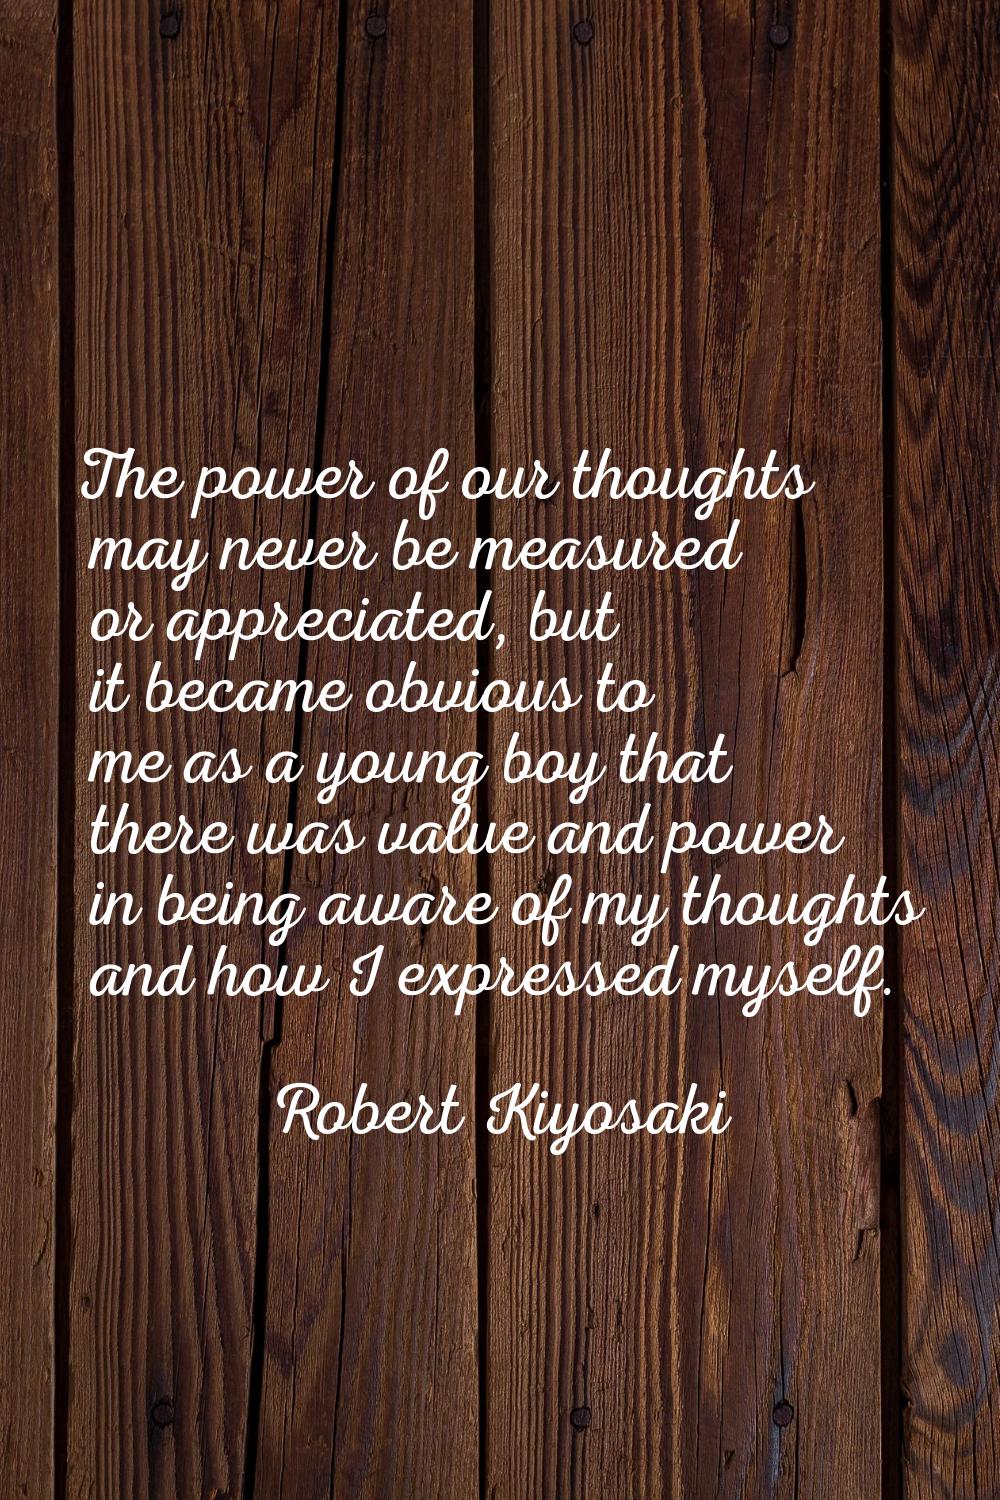 The power of our thoughts may never be measured or appreciated, but it became obvious to me as a yo